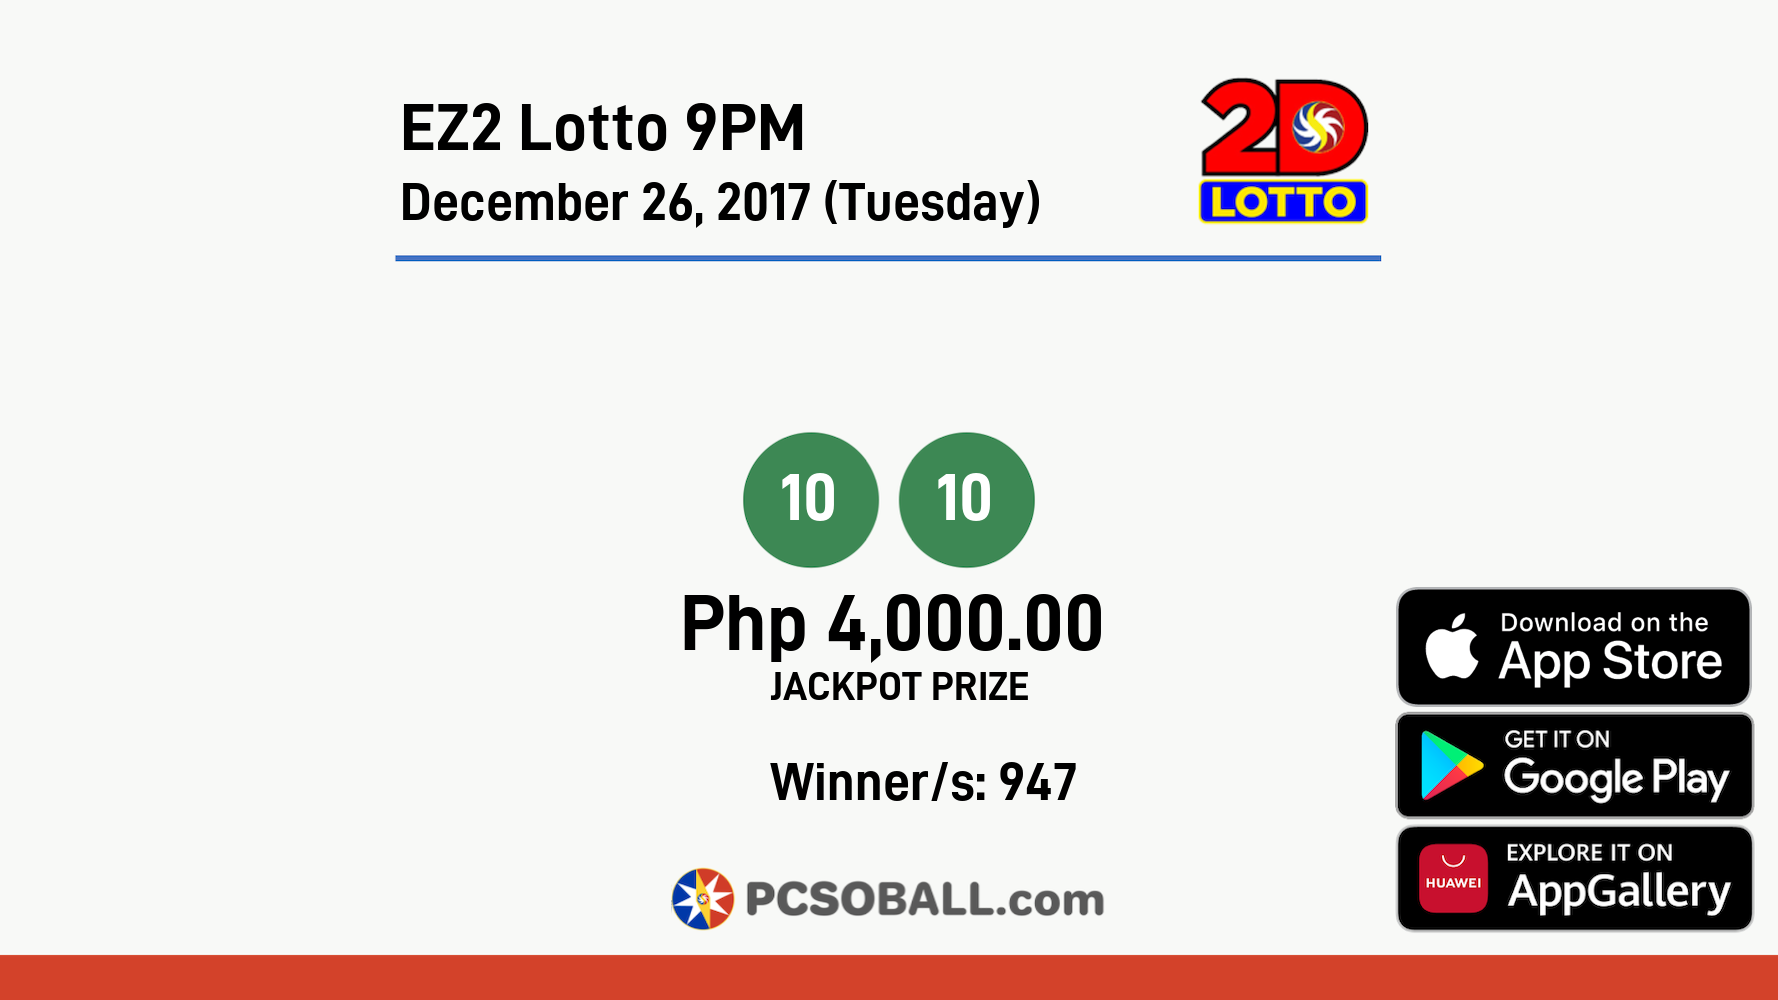 EZ2 Lotto 9PM December 26, 2017 (Tuesday) Result